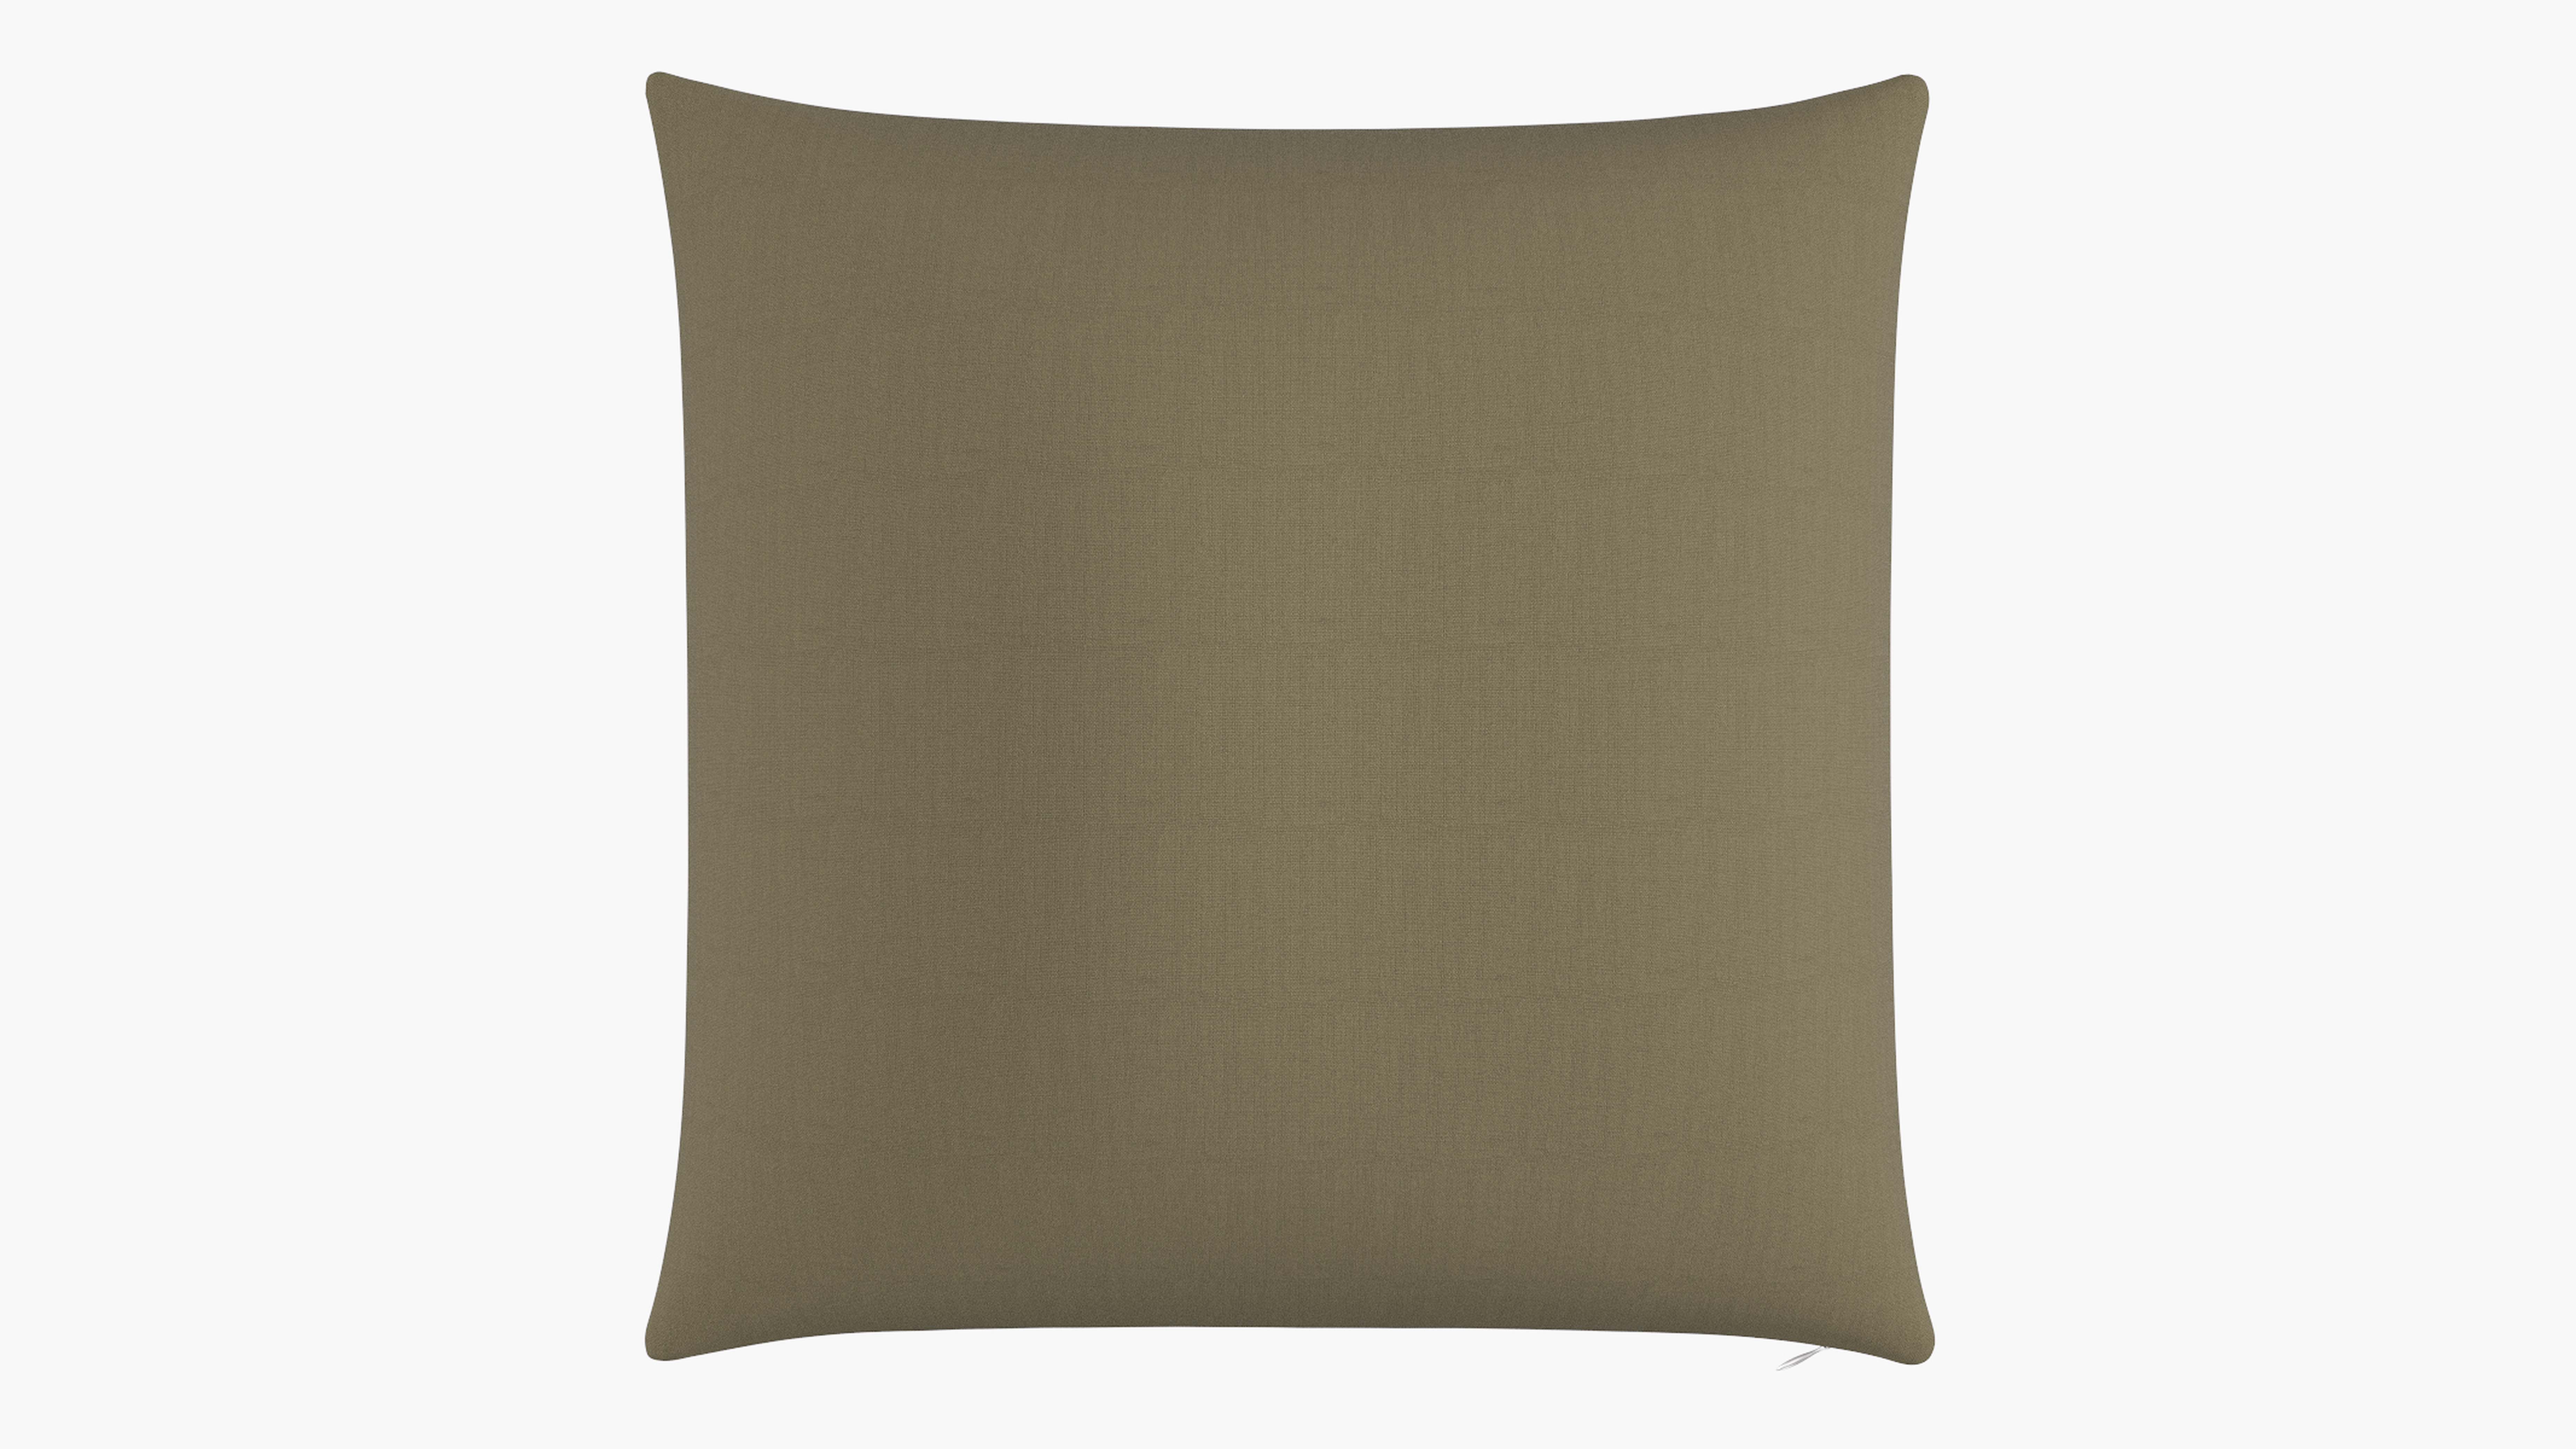 Throw Pillow 26", Olive Everyday Linen, 26" x 26" - The Inside